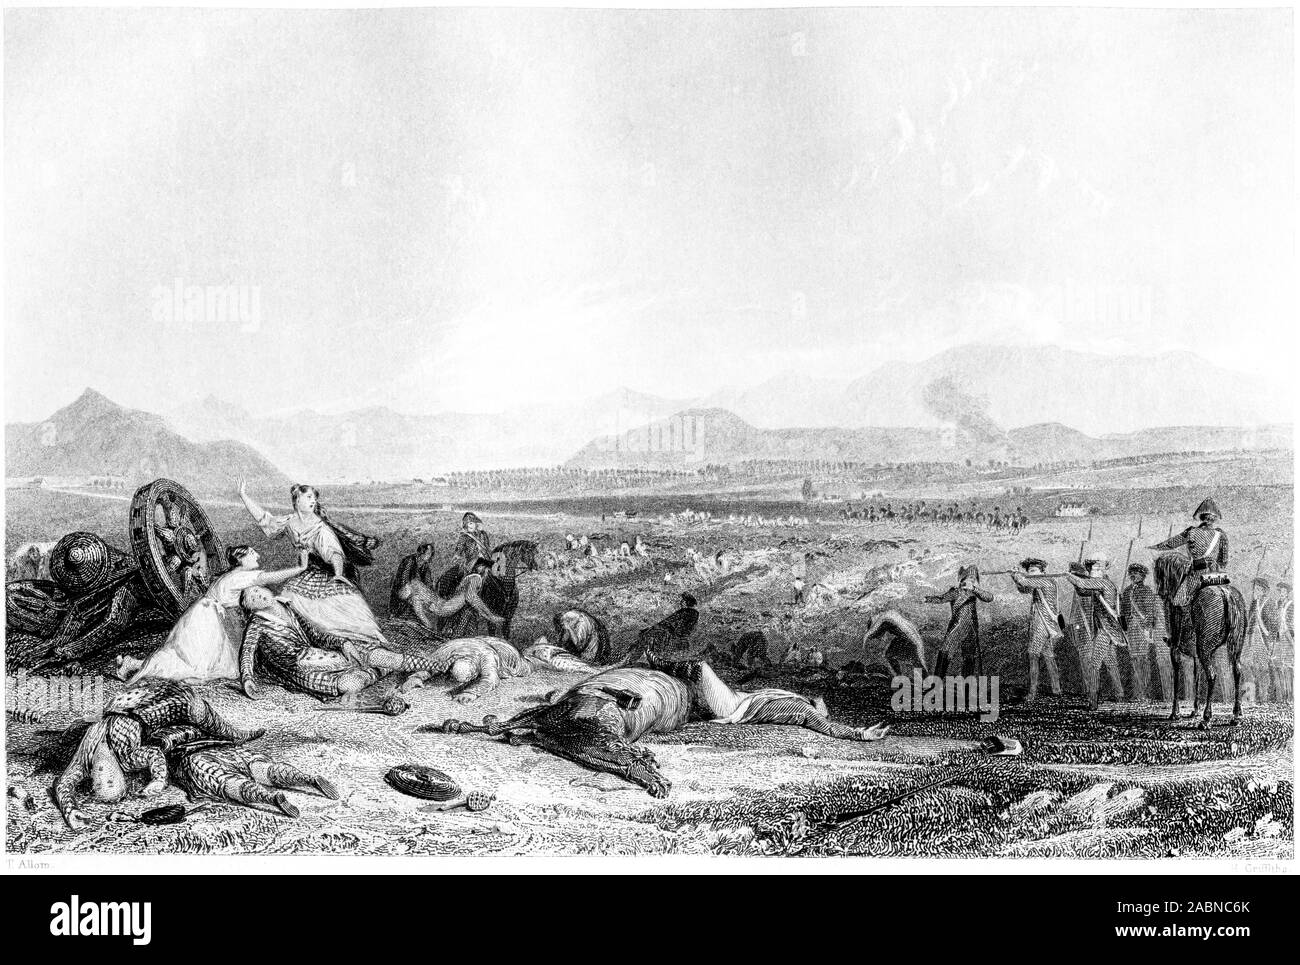 An engraving of Culloden Moor, looking across the Moray Firth, Inverness-shire scanned at high resolution from a book printed in 1859. Stock Photo